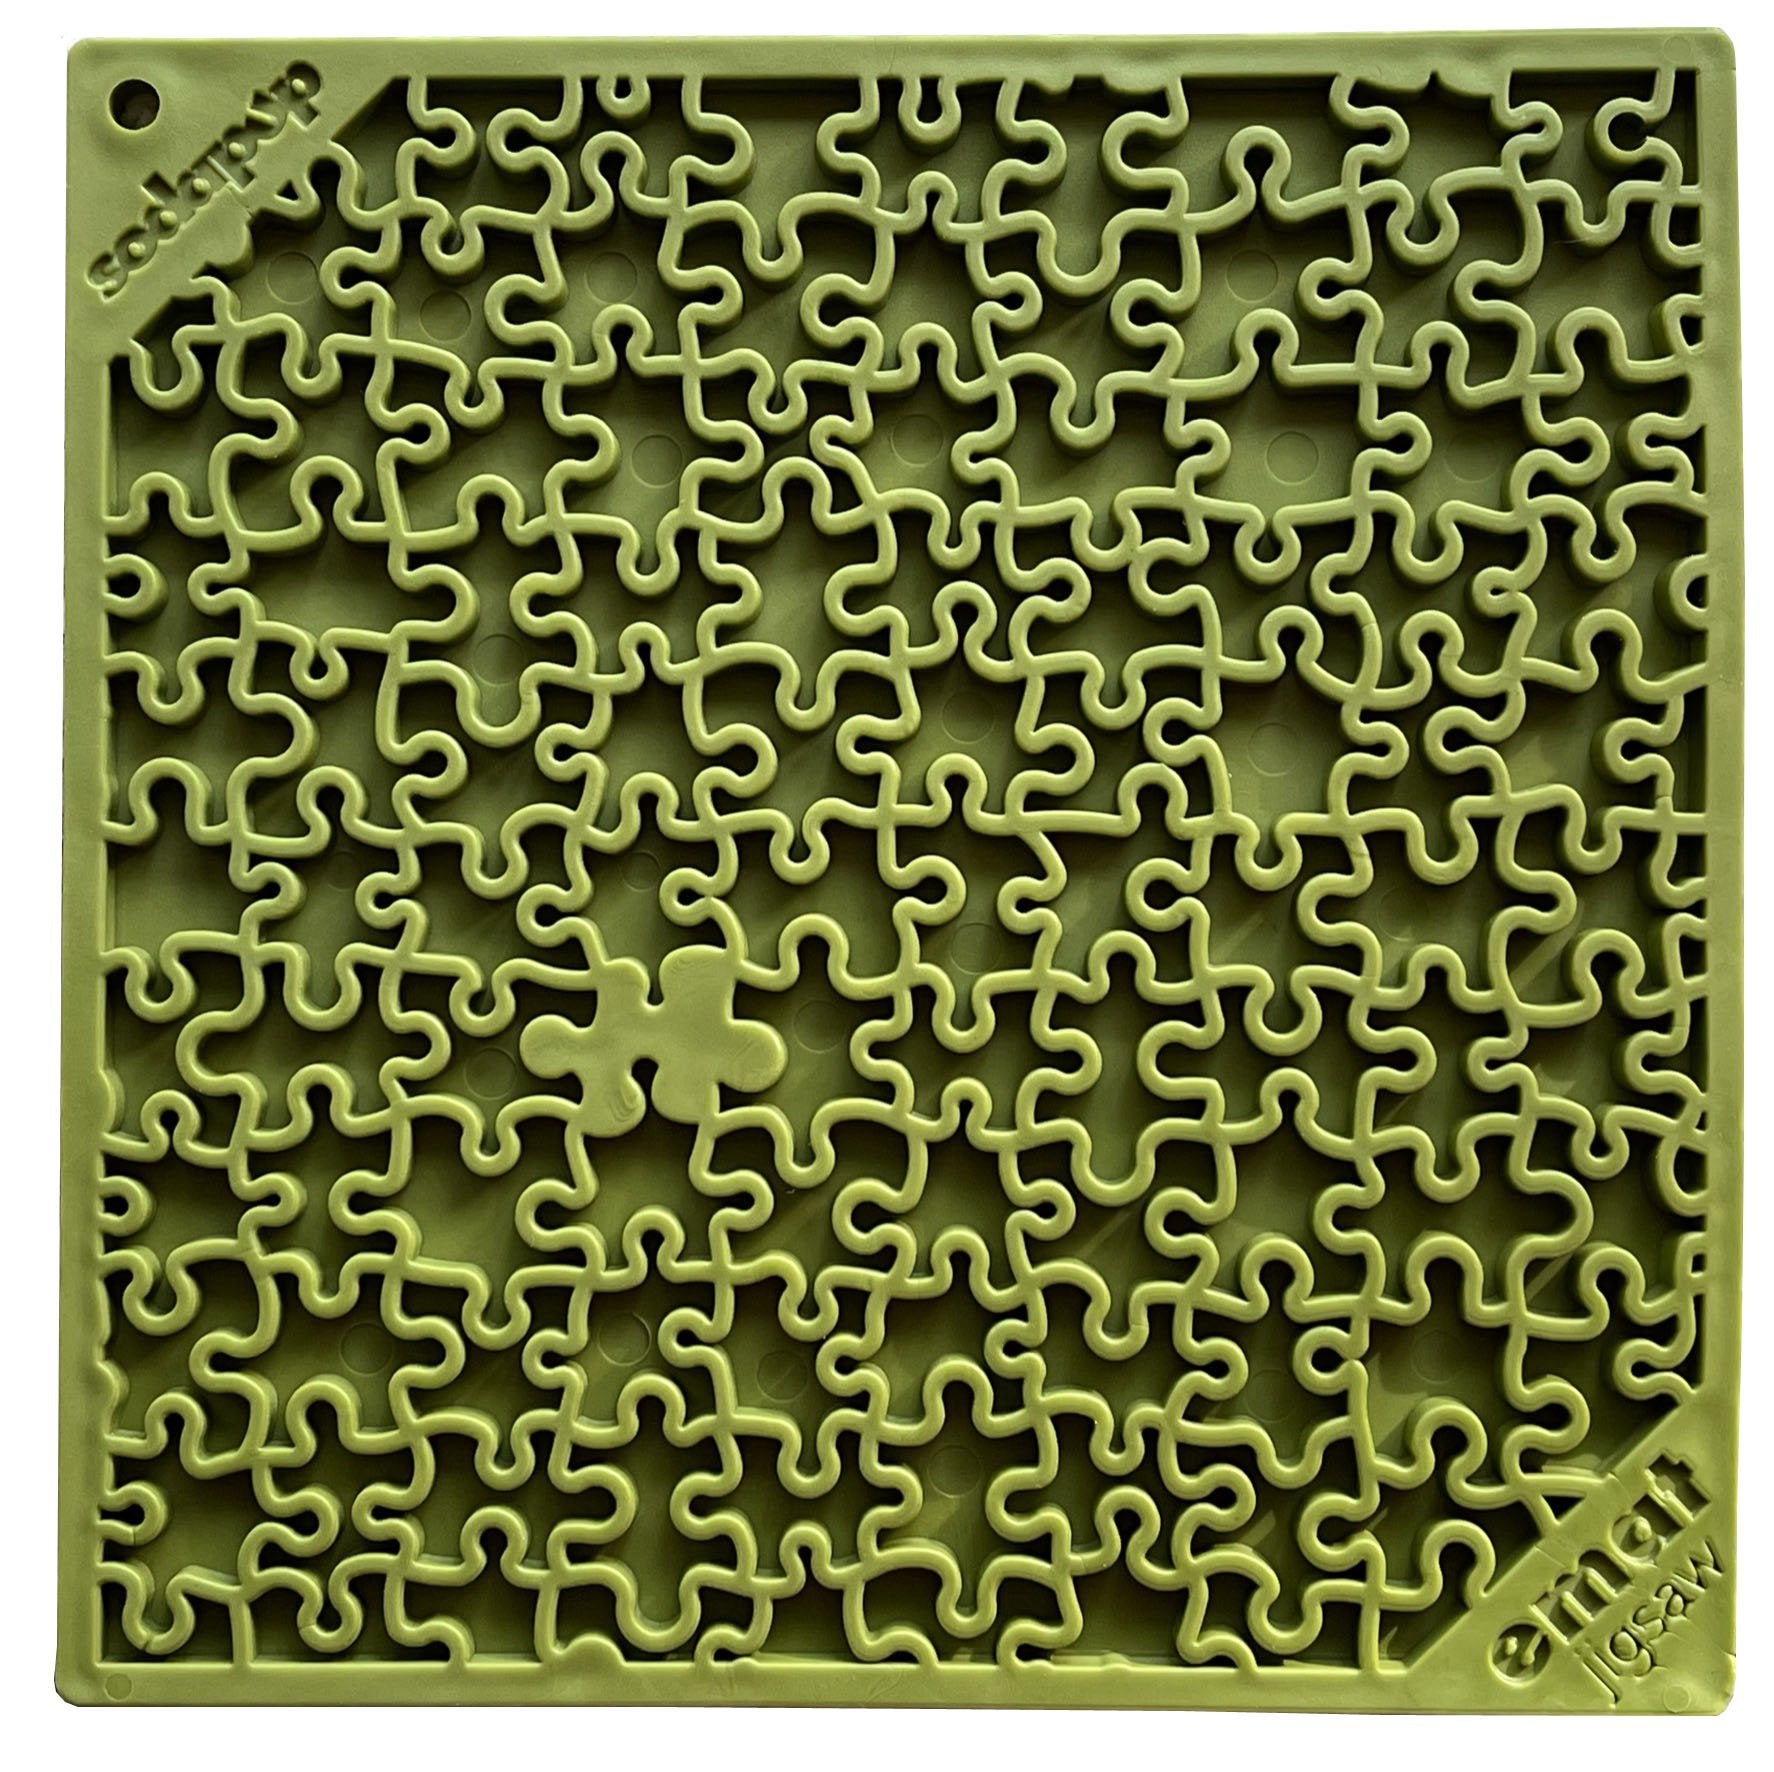 Green Silicone Soda Pup EMAT ENRICHMENT LICKING MAT trivet with an intricate interlocking puzzle piece design by Your Whole Dog.